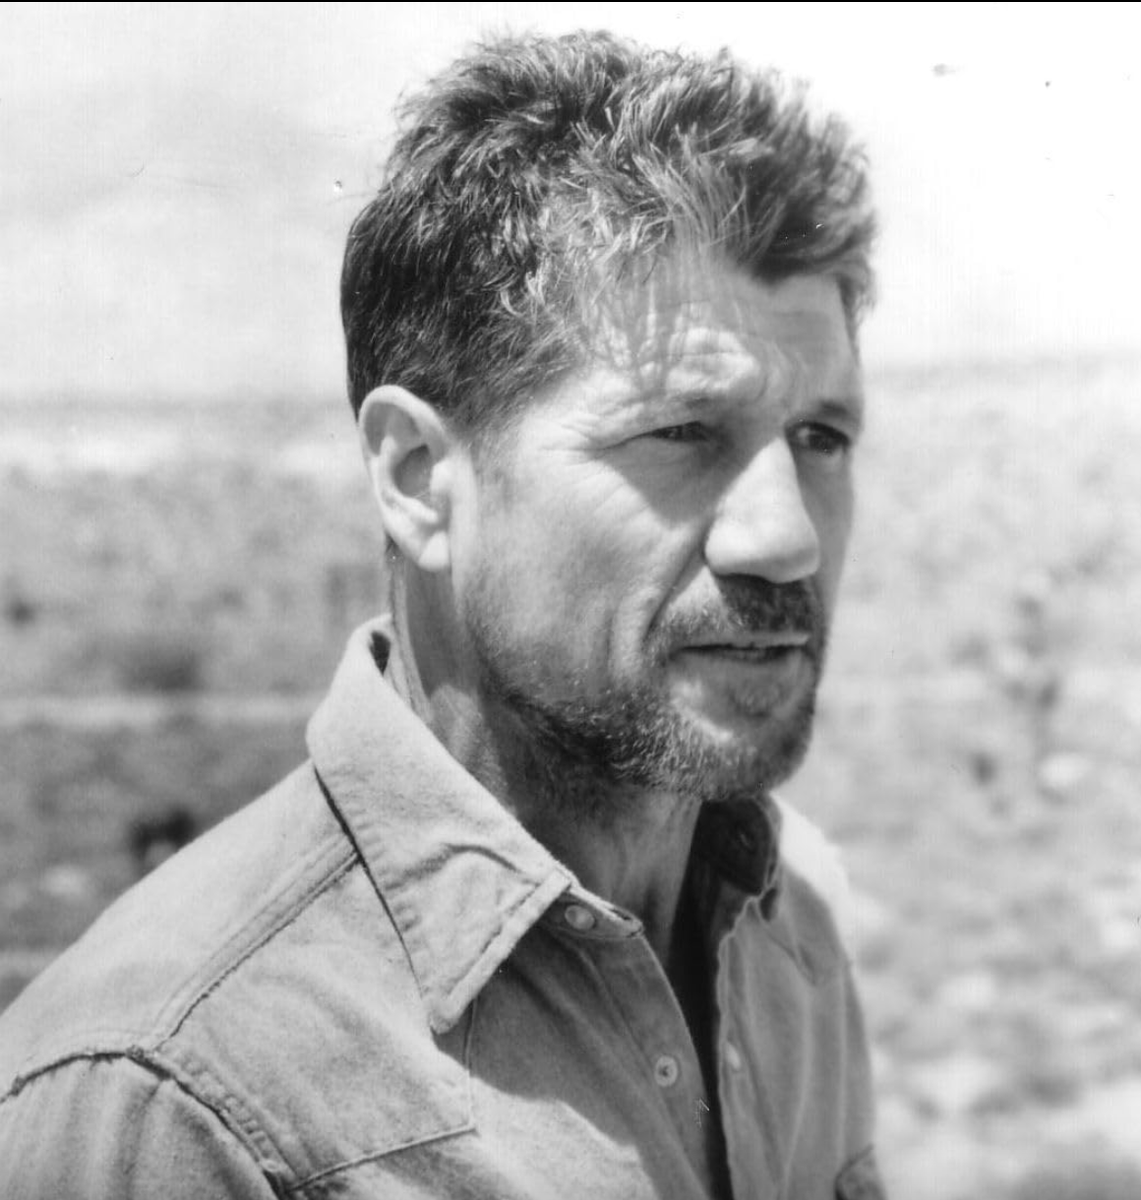 We lost #FredWard 2 years ago. Remembering him today as a great actor and colleague. Ward was in 2 of our films, #CastADeadlySpell and #Tremors.